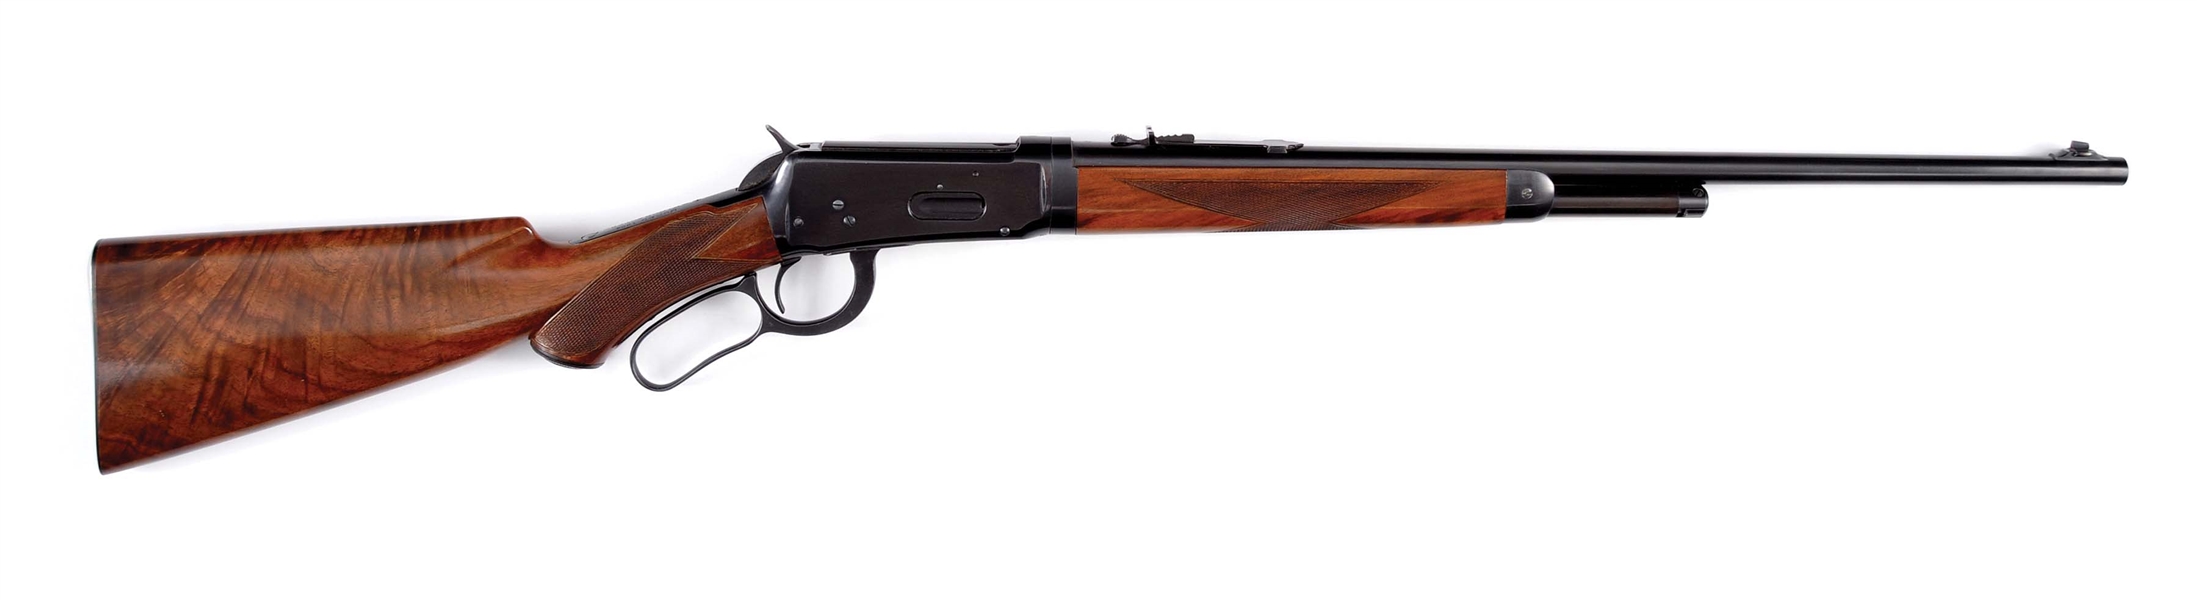 (C) LATE PRODUCTION DELUXE WINCHESTER 1894 TAKEDOWN RIFLE (1919).